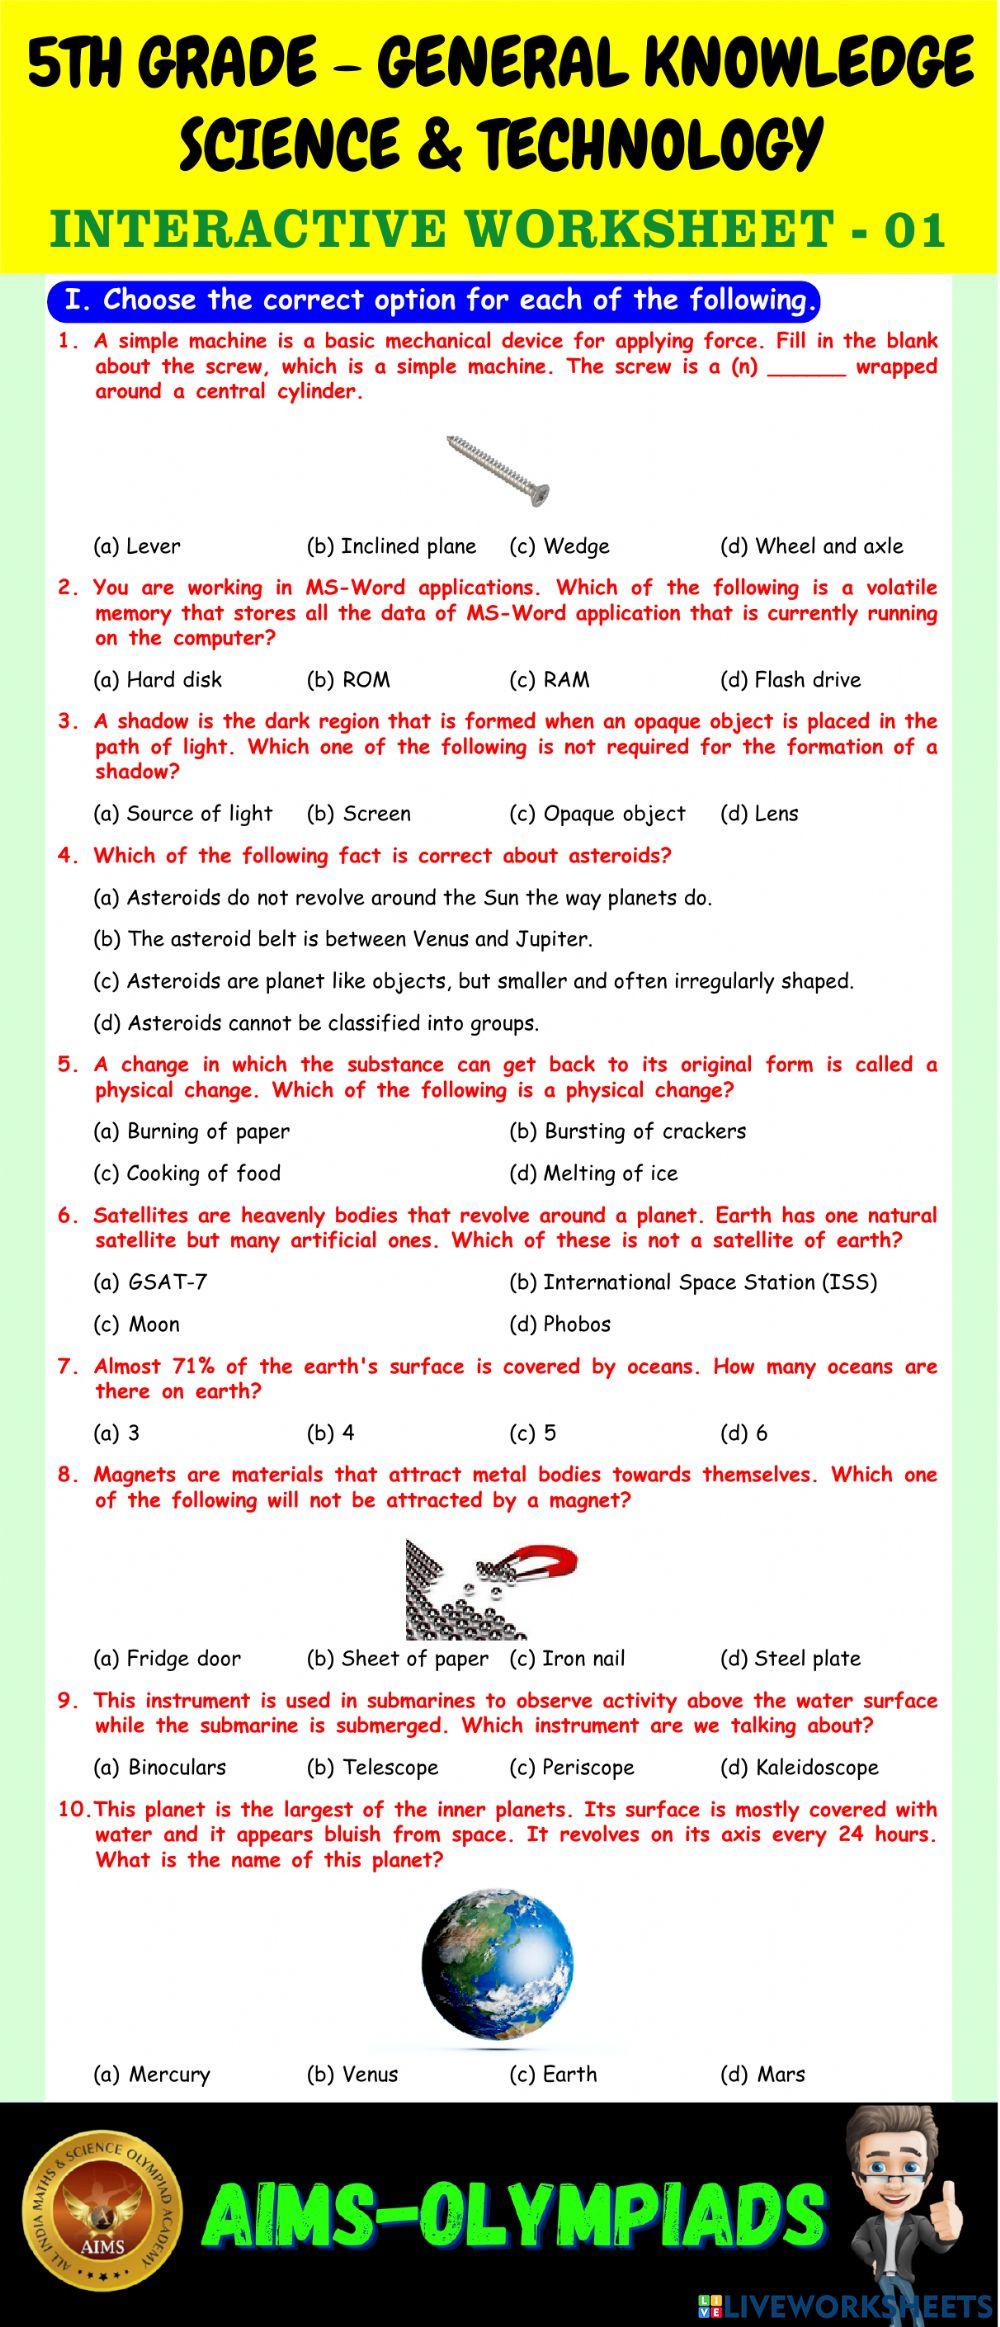 5th-general knowledge-ps01-science & technology